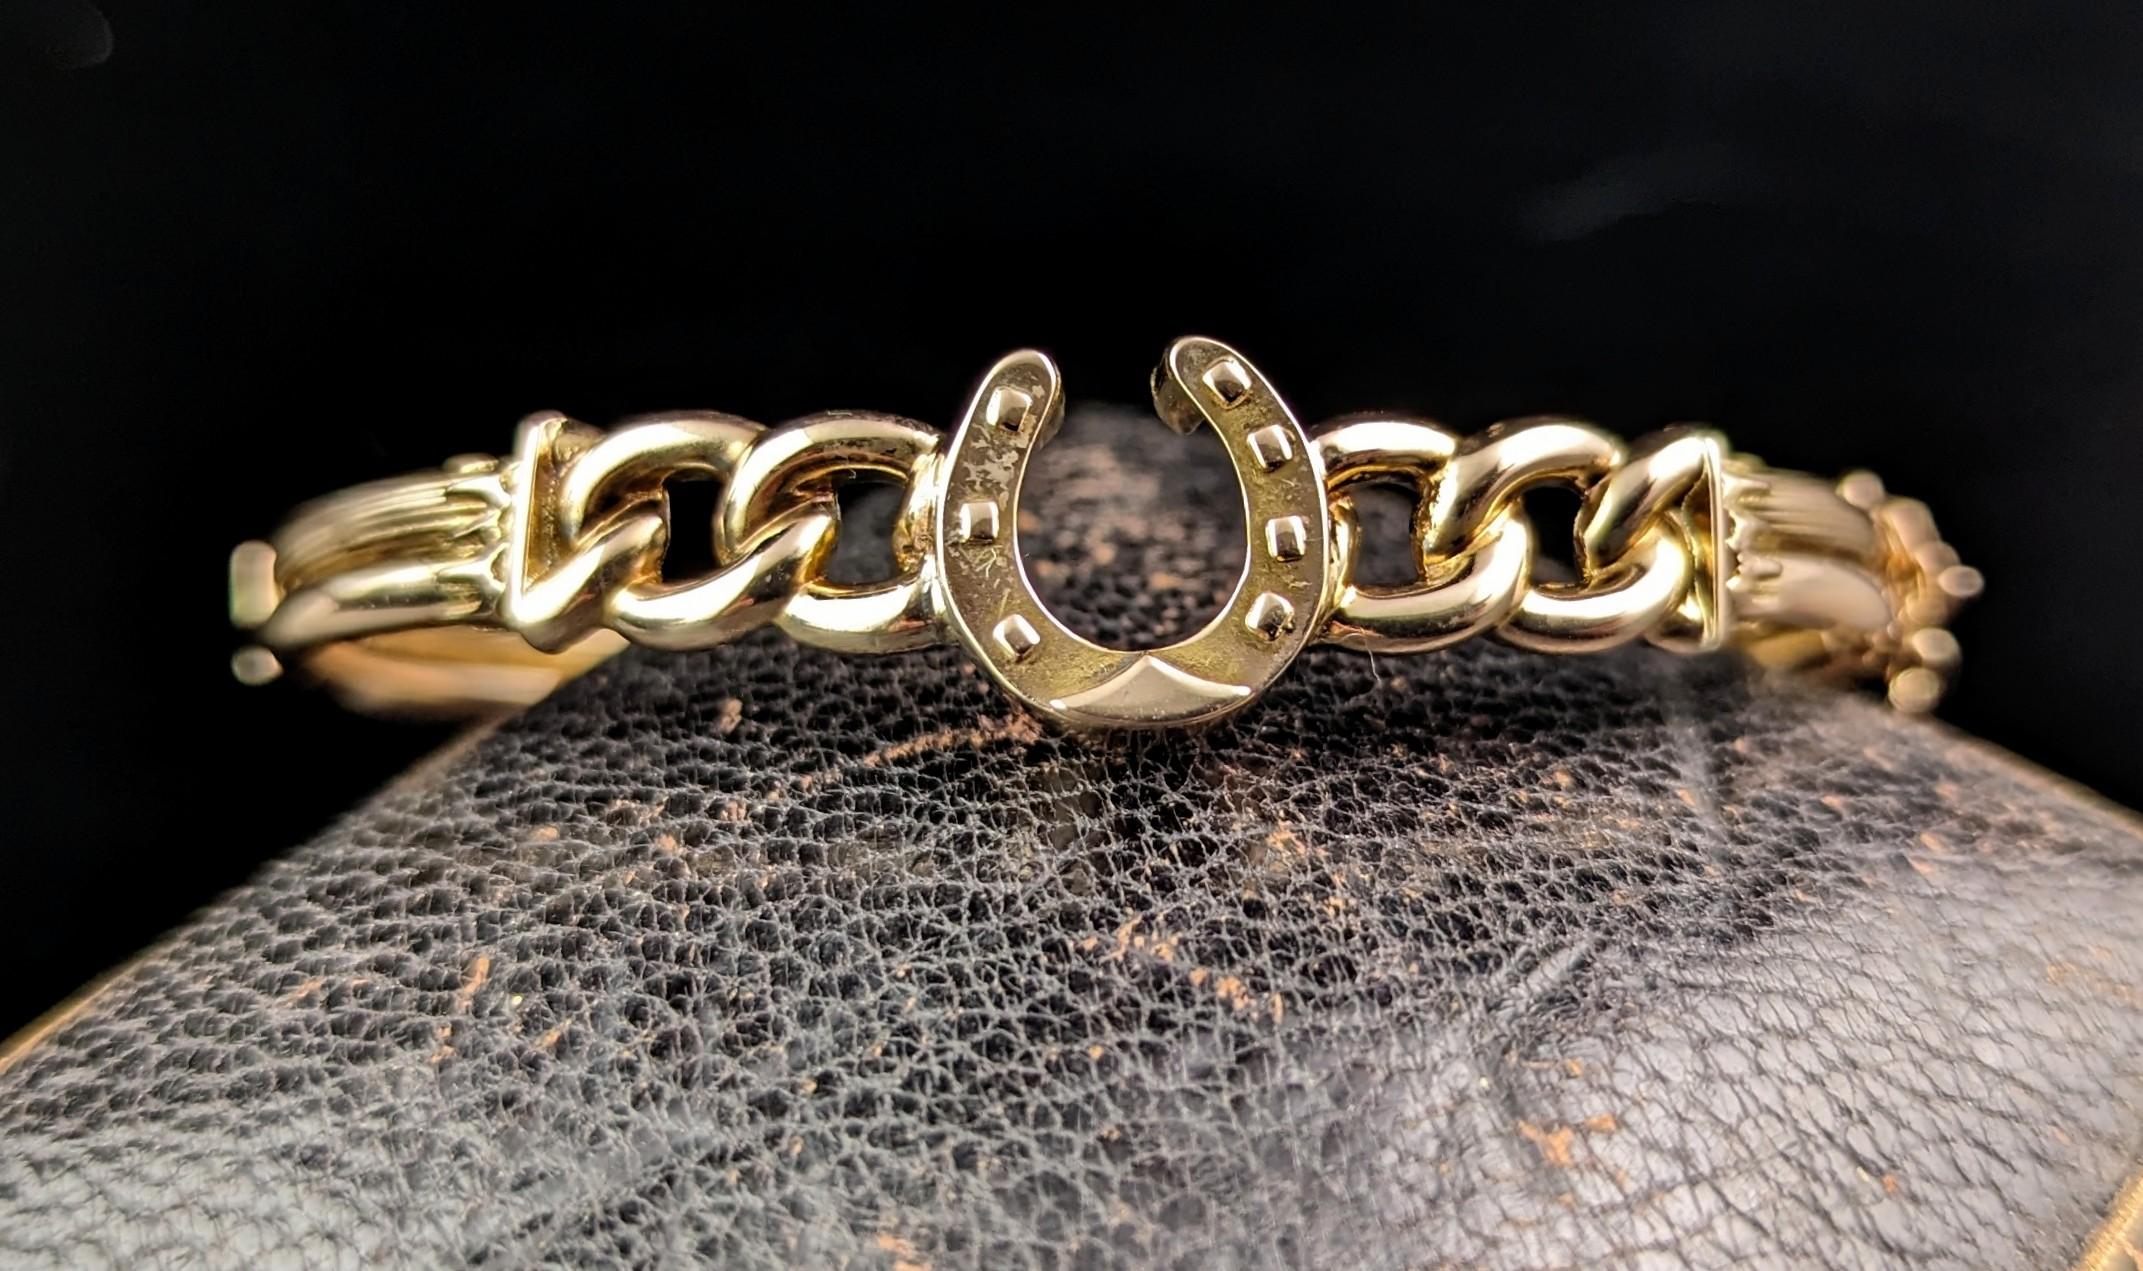 We love a good antique lucky charm and this Beautiful Victorian 9ct gold, Lucky horseshoe bangle is no exception.

It is crafted in rich 9ct yellow gold, a more unusual tone for bangles of the era with most being rose gold and this really makes it